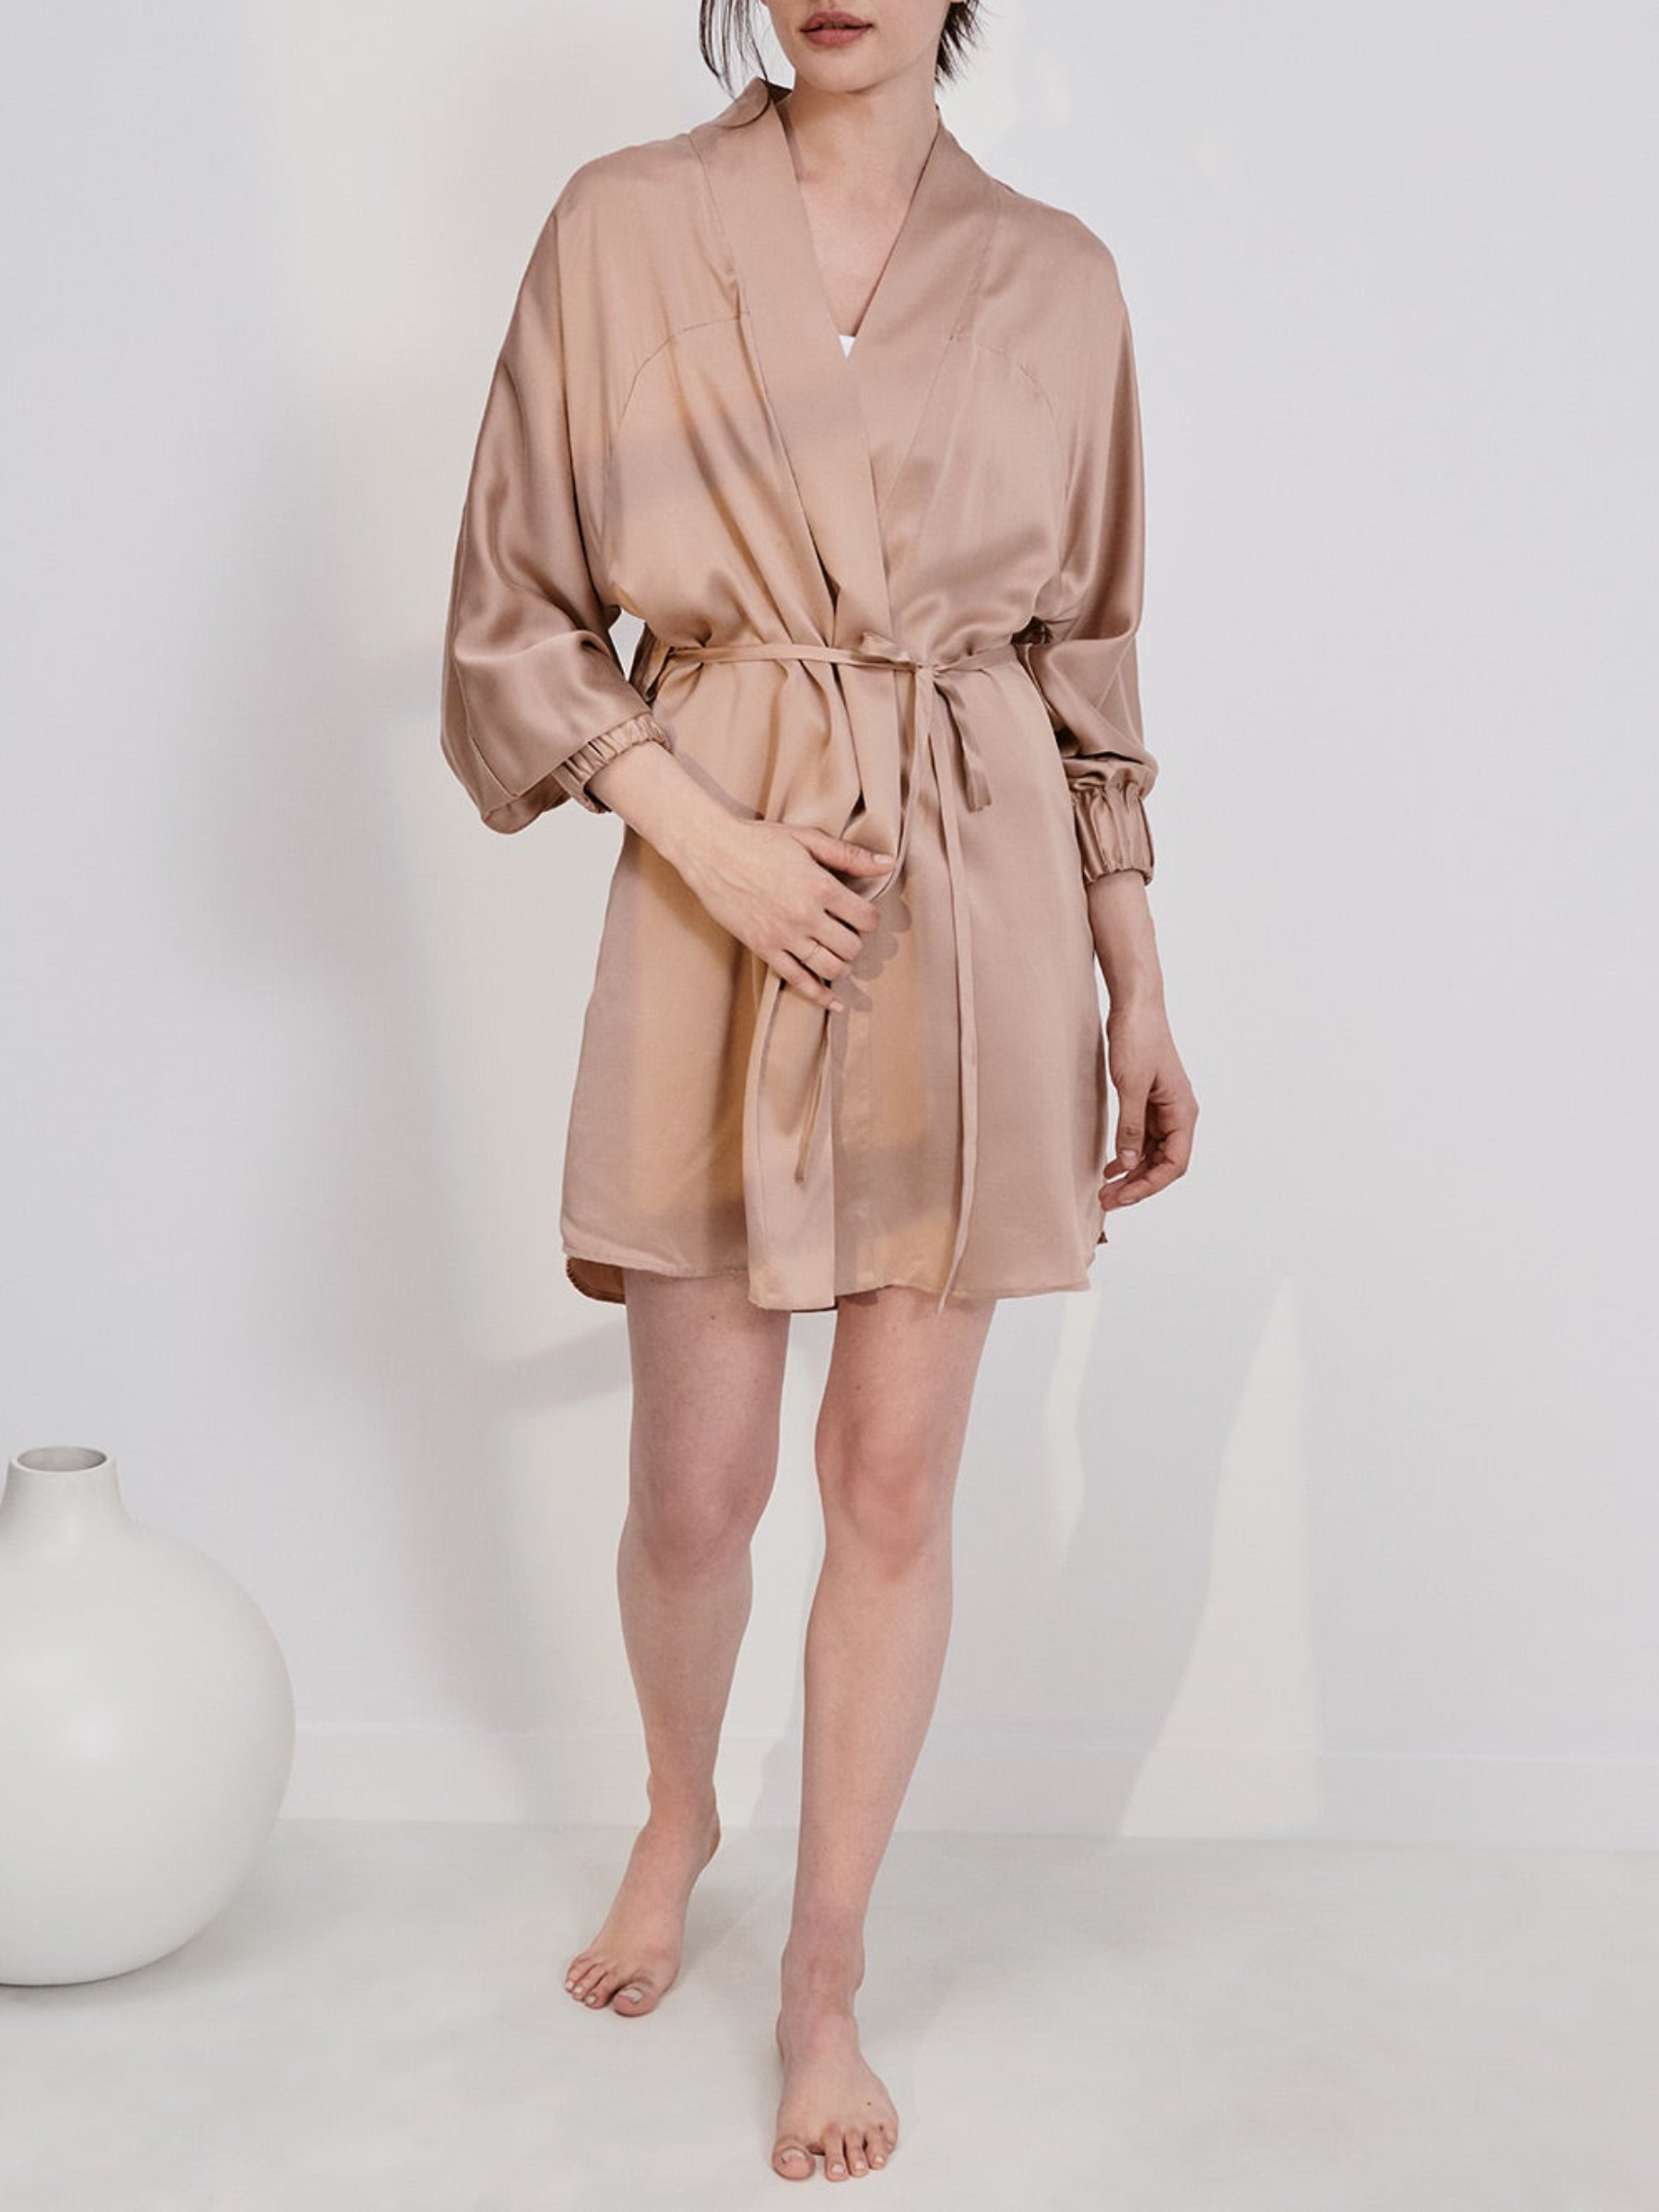 Here's a sleepwear gift that says self care. Lunya's Washable Silk Robe is like wrapping them in a hug of pure silk every day, and it's washable so it'll last them in the long run. It's perfect for everything from a self-care Sundays to getting ready for the day ahead. $278, Lunya. <a href="https://lunya.co/products/womens-washable-silk-robe-otium-tan">Get it now!</a><p>Sign up for today’s biggest stories, from pop culture to politics.</p><a href="https://www.glamour.com/newsletter/news?sourceCode=msnsend">Sign Up</a>